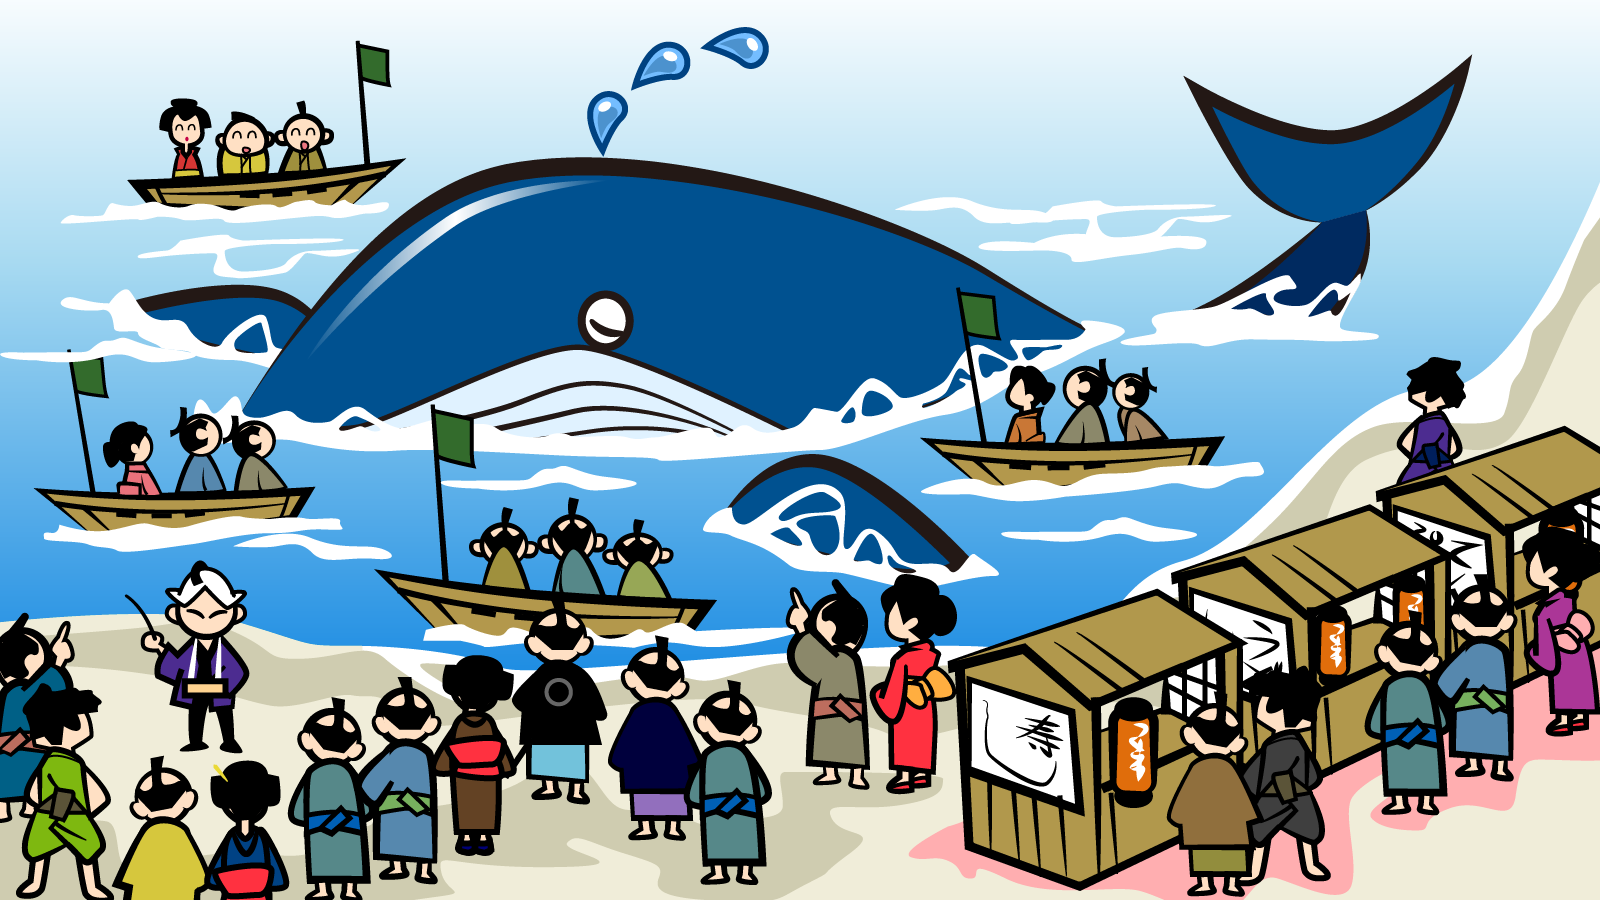 The Day a Whale Washed Up on Edo